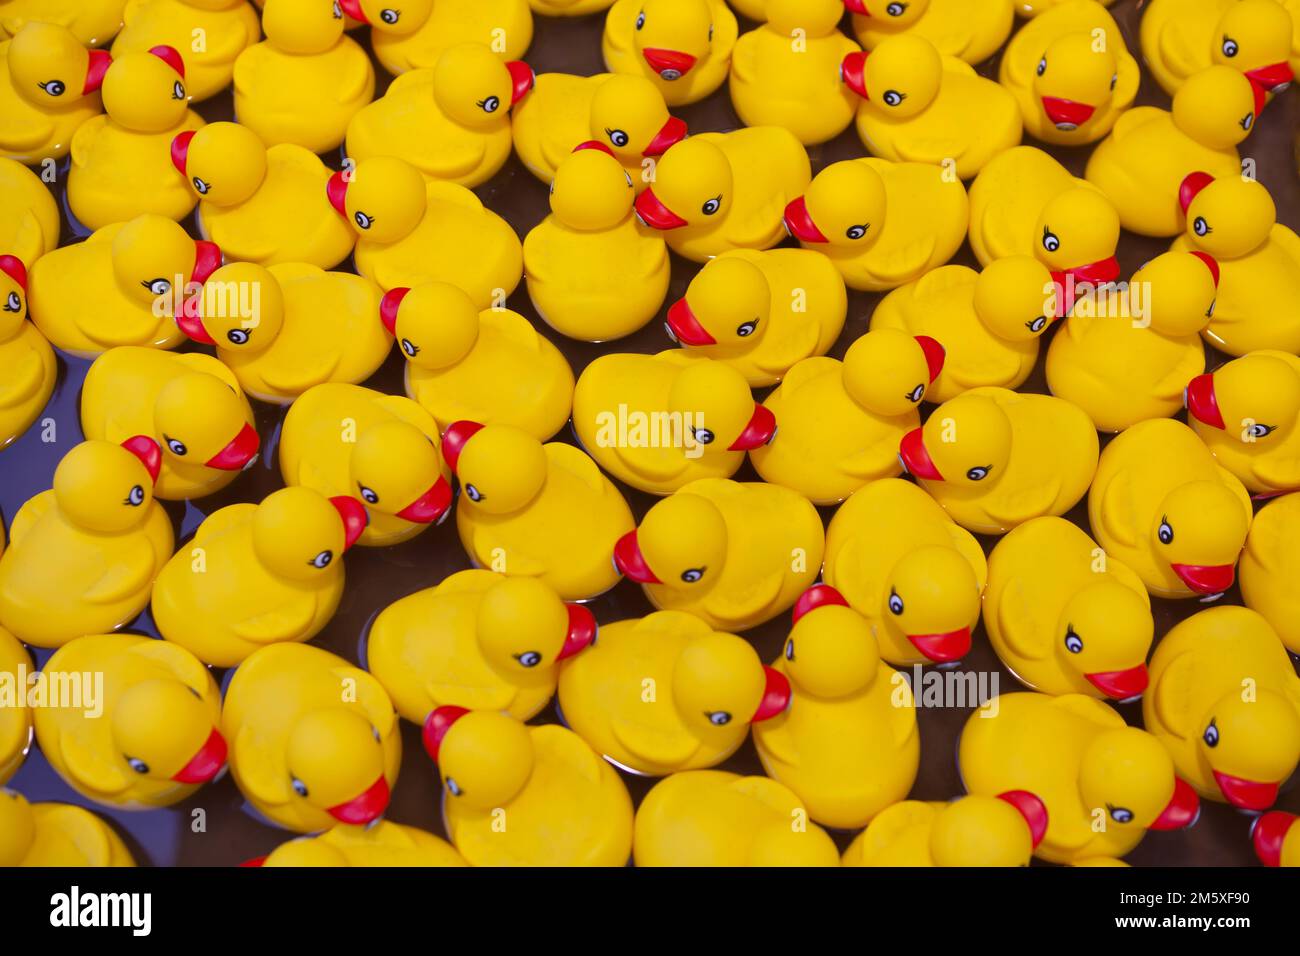 Lot of floating Yellow rubber ducks -toy design. team work together. Meetings Community Cooperation Stock Photo